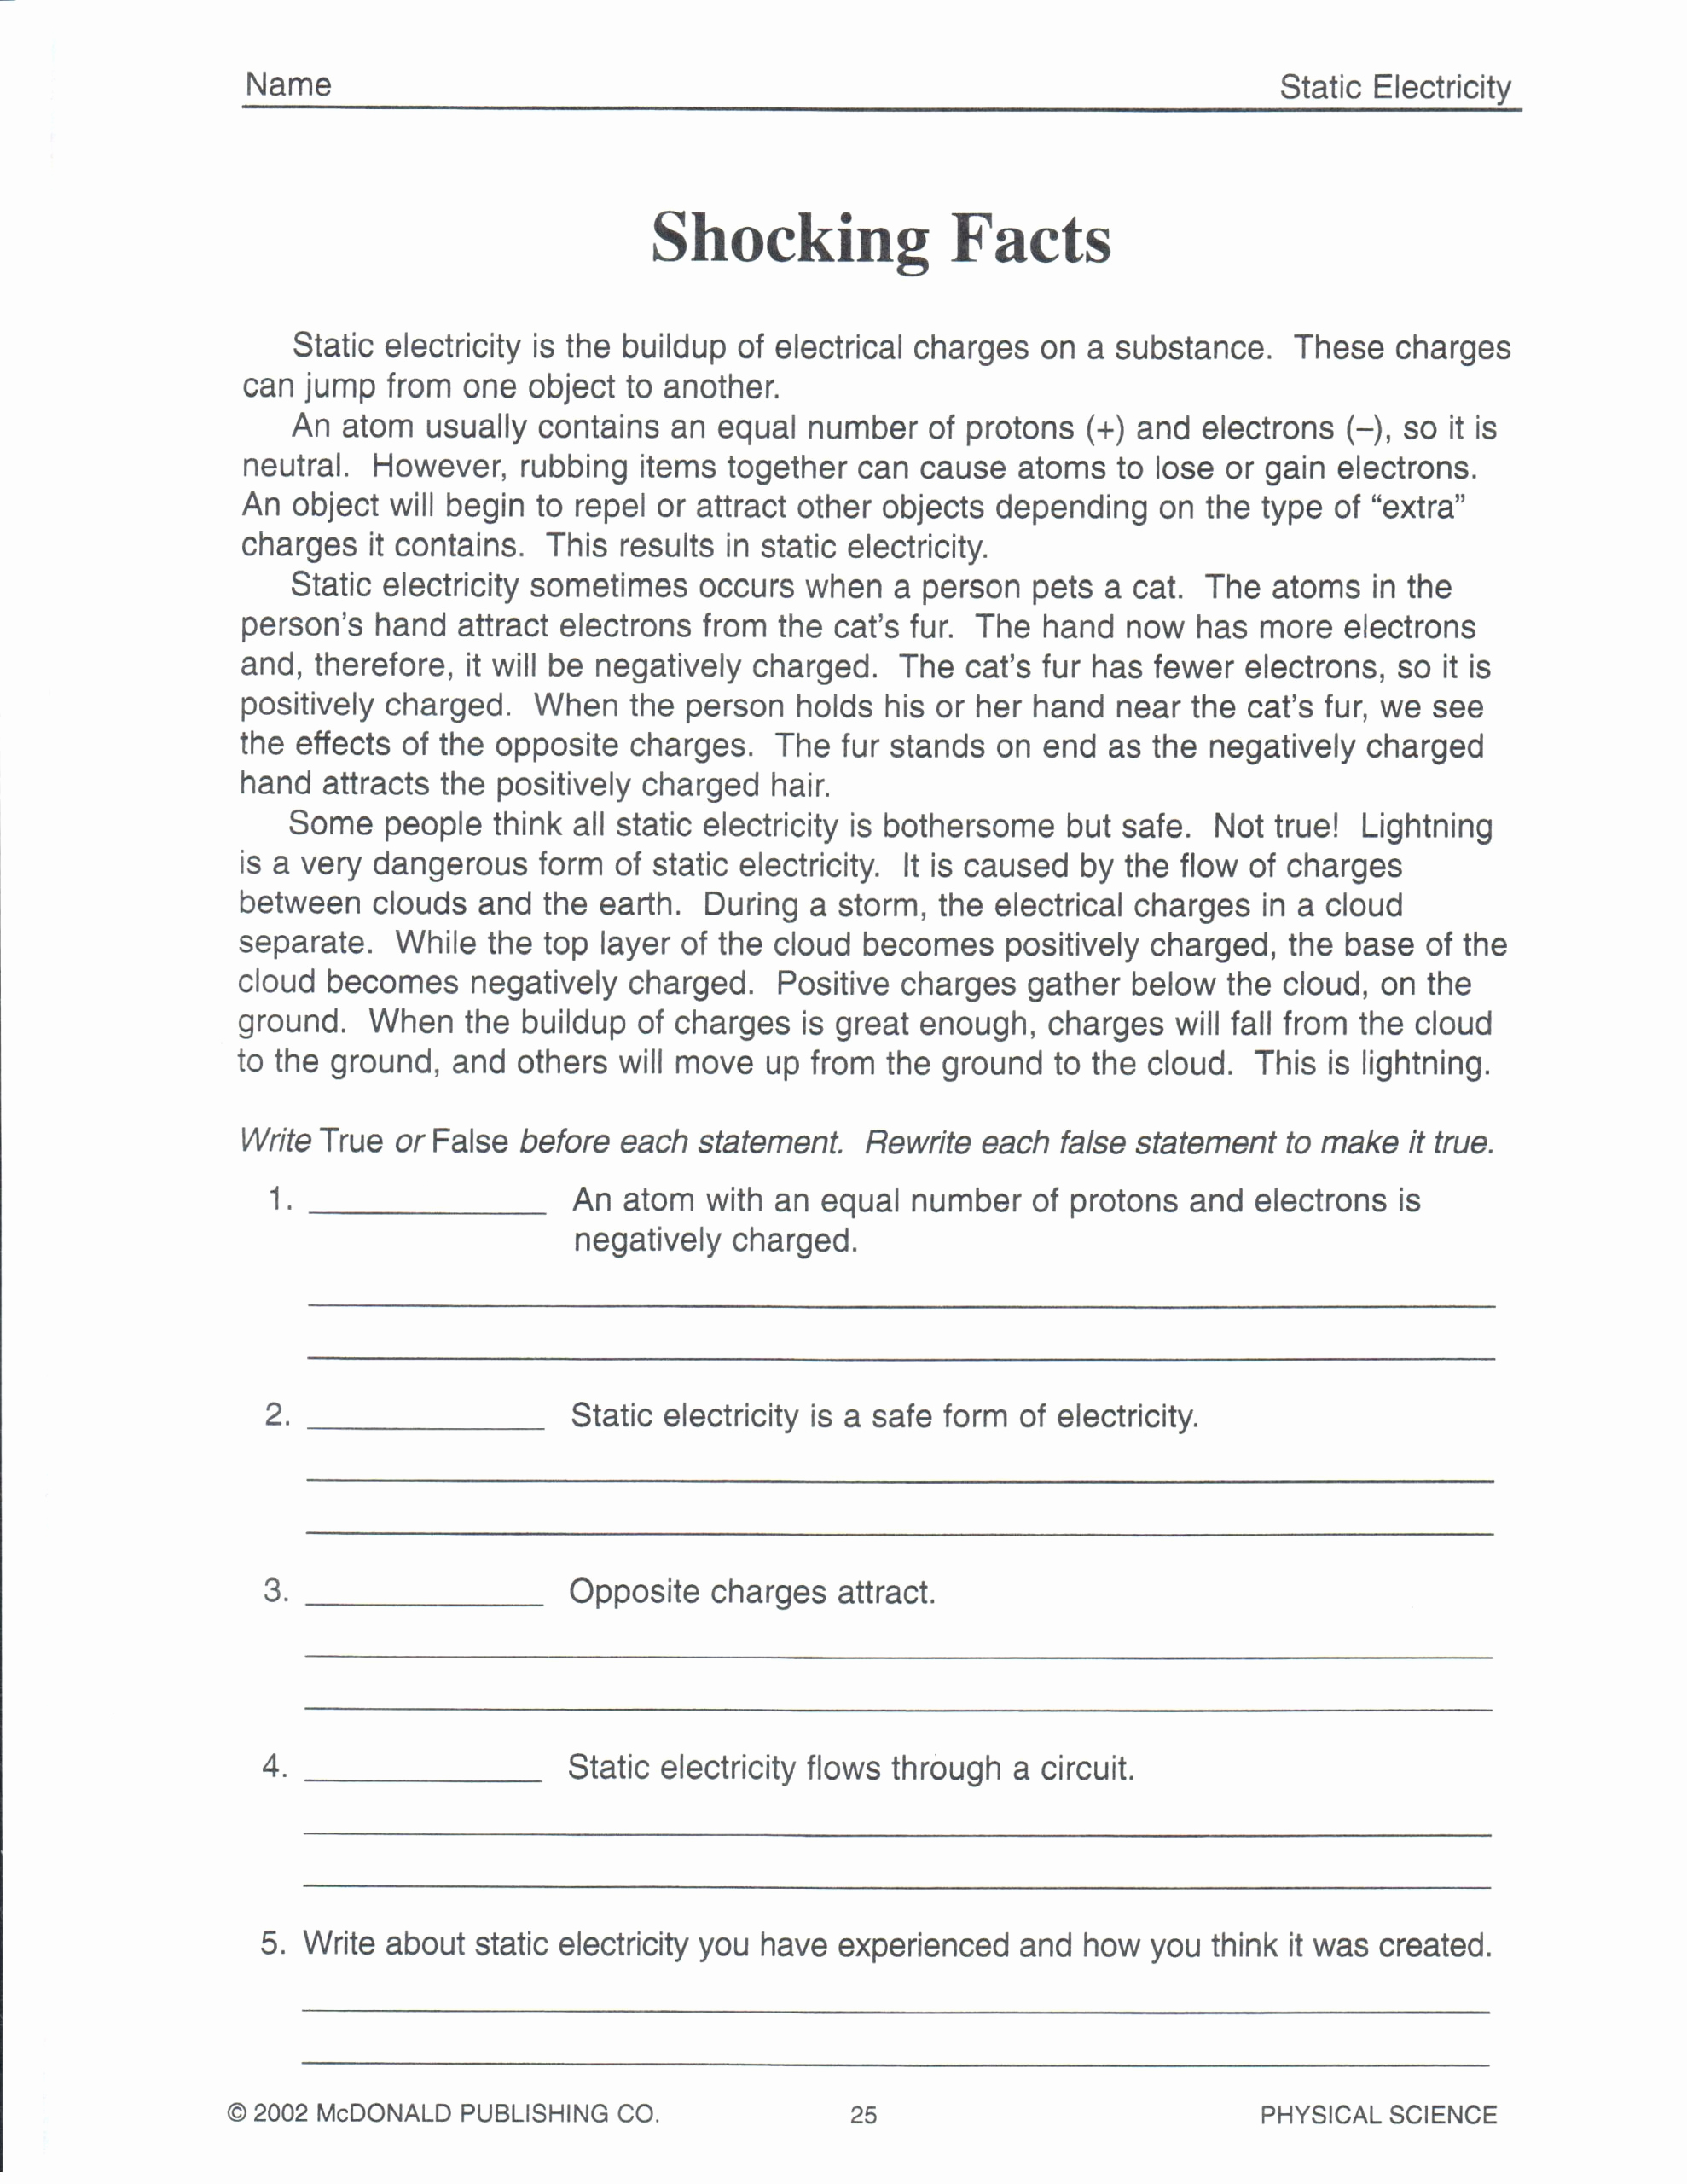 Free 8th Grade Science Worksheets Lovely 20 8th Grade Science Worksheets